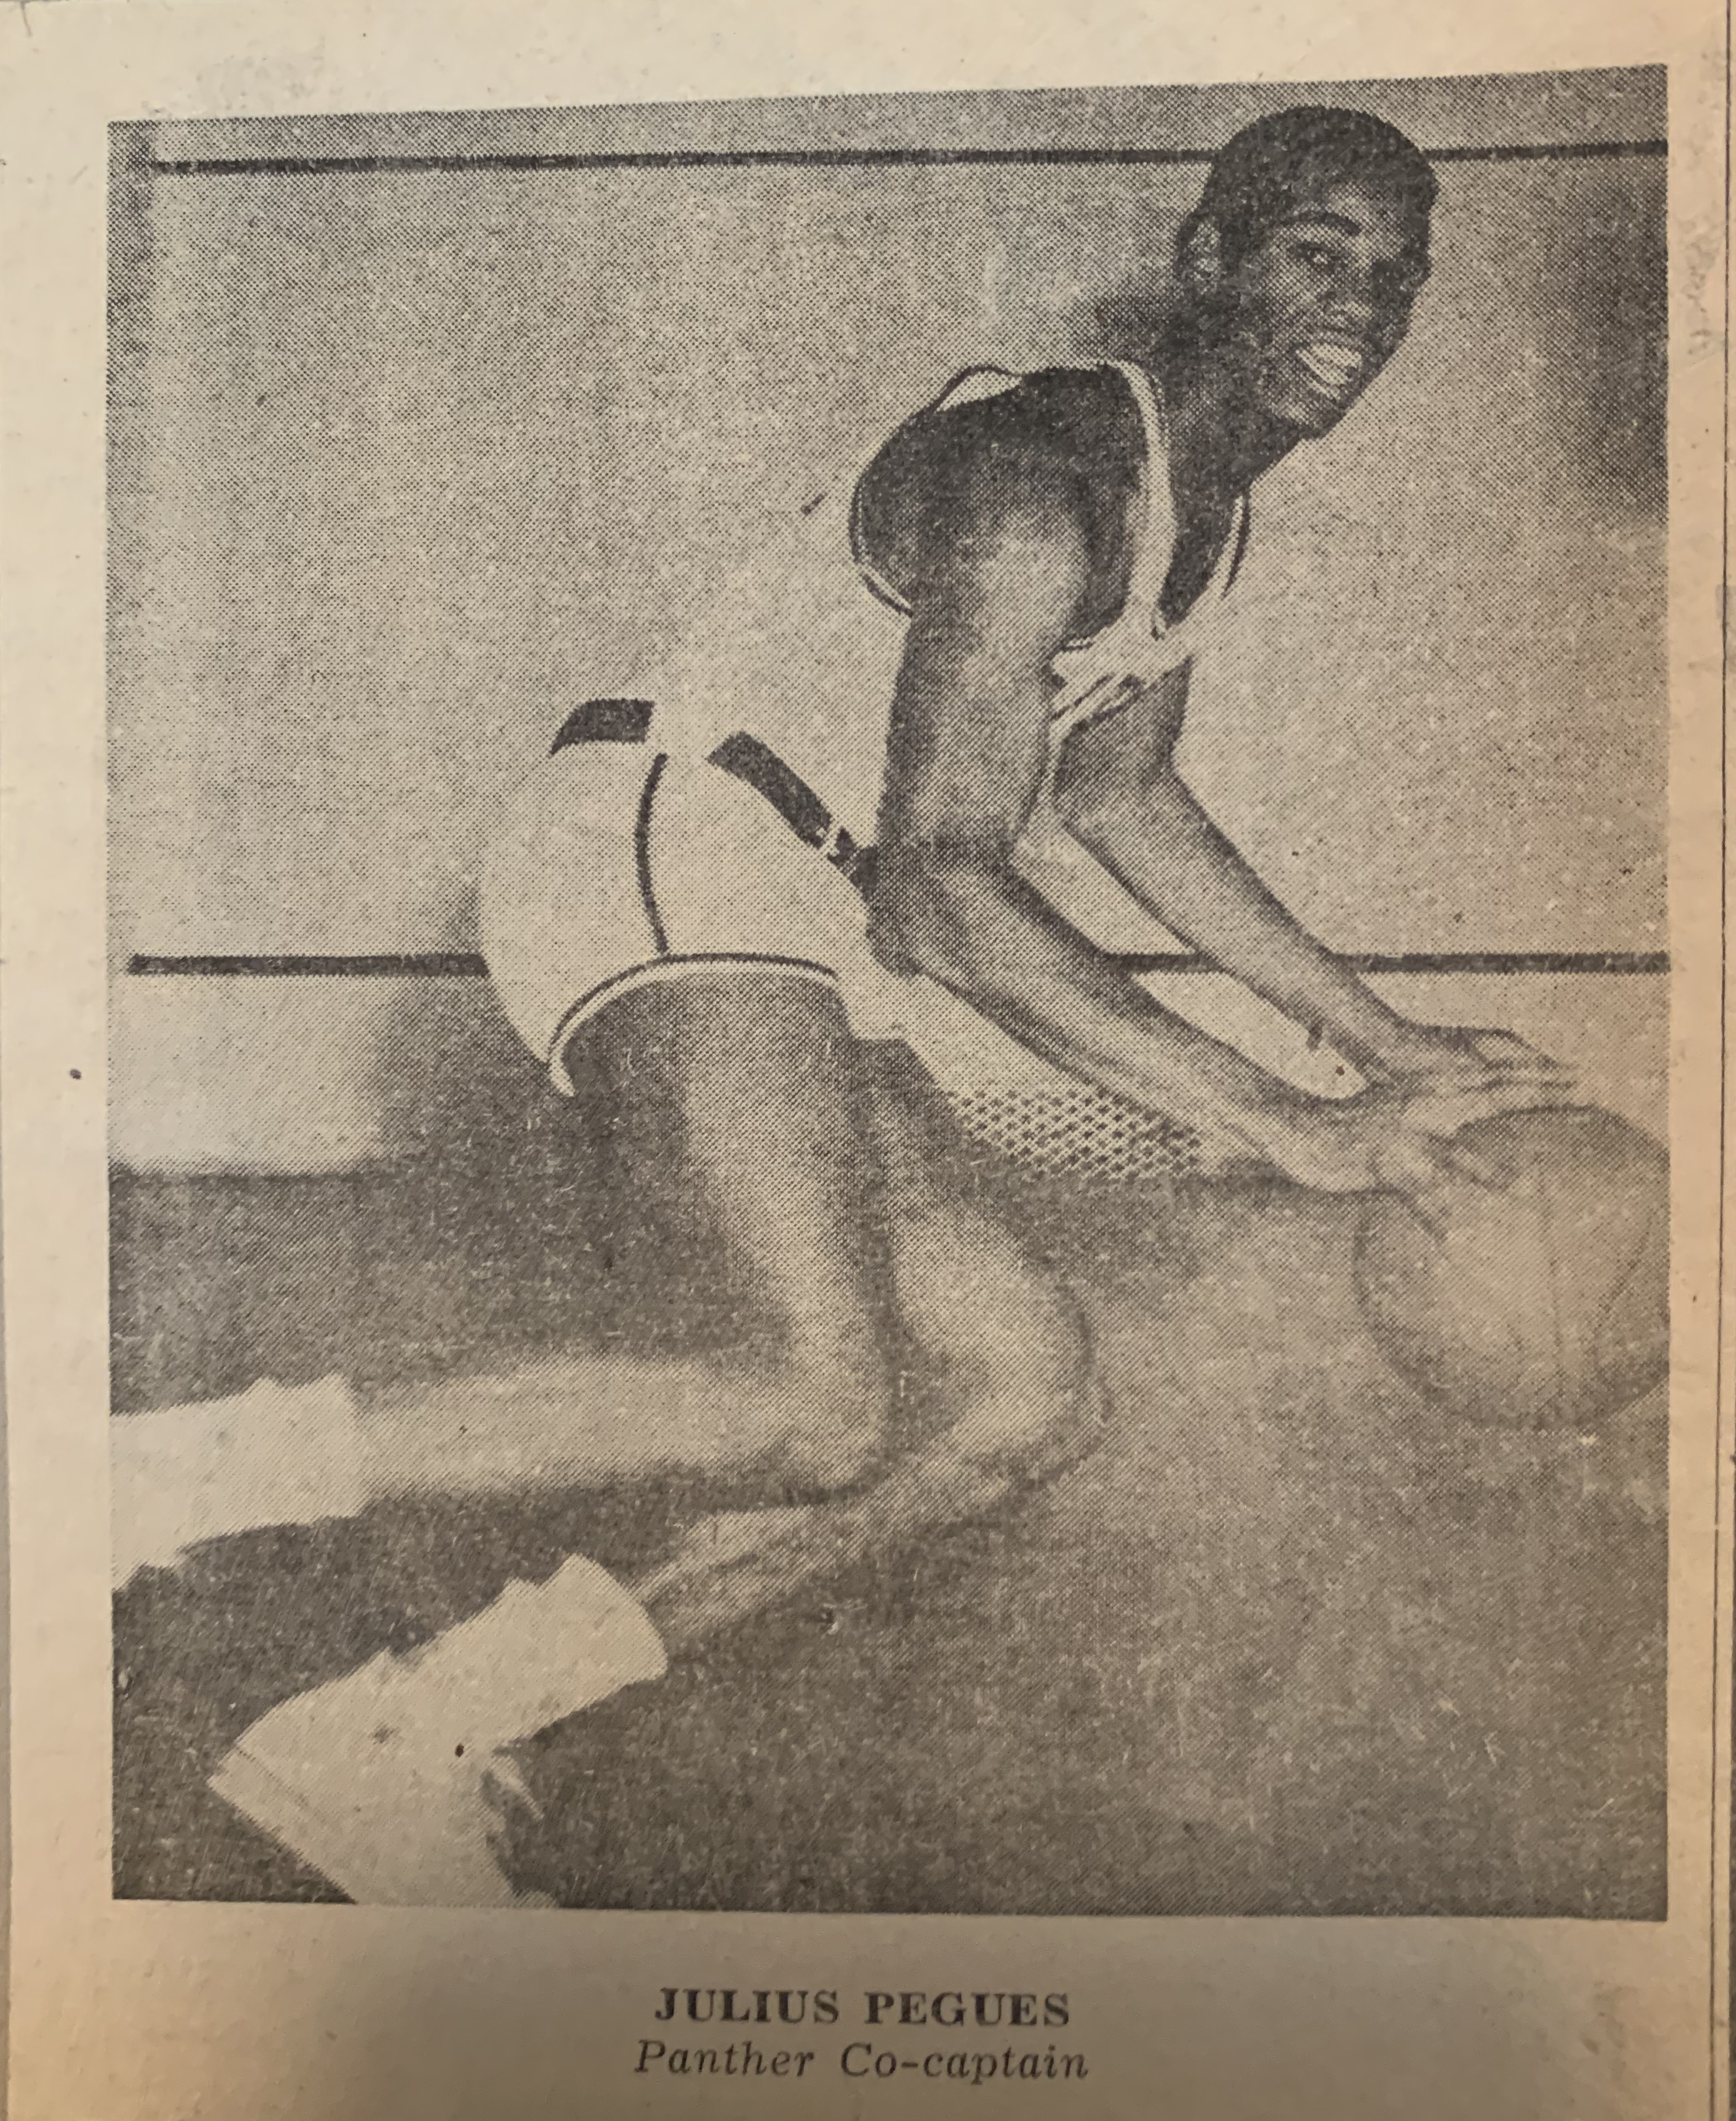 News clipping: A black-and-white photograph shows Julius Pegues dribbling a basketball in profile, face turned toward camera